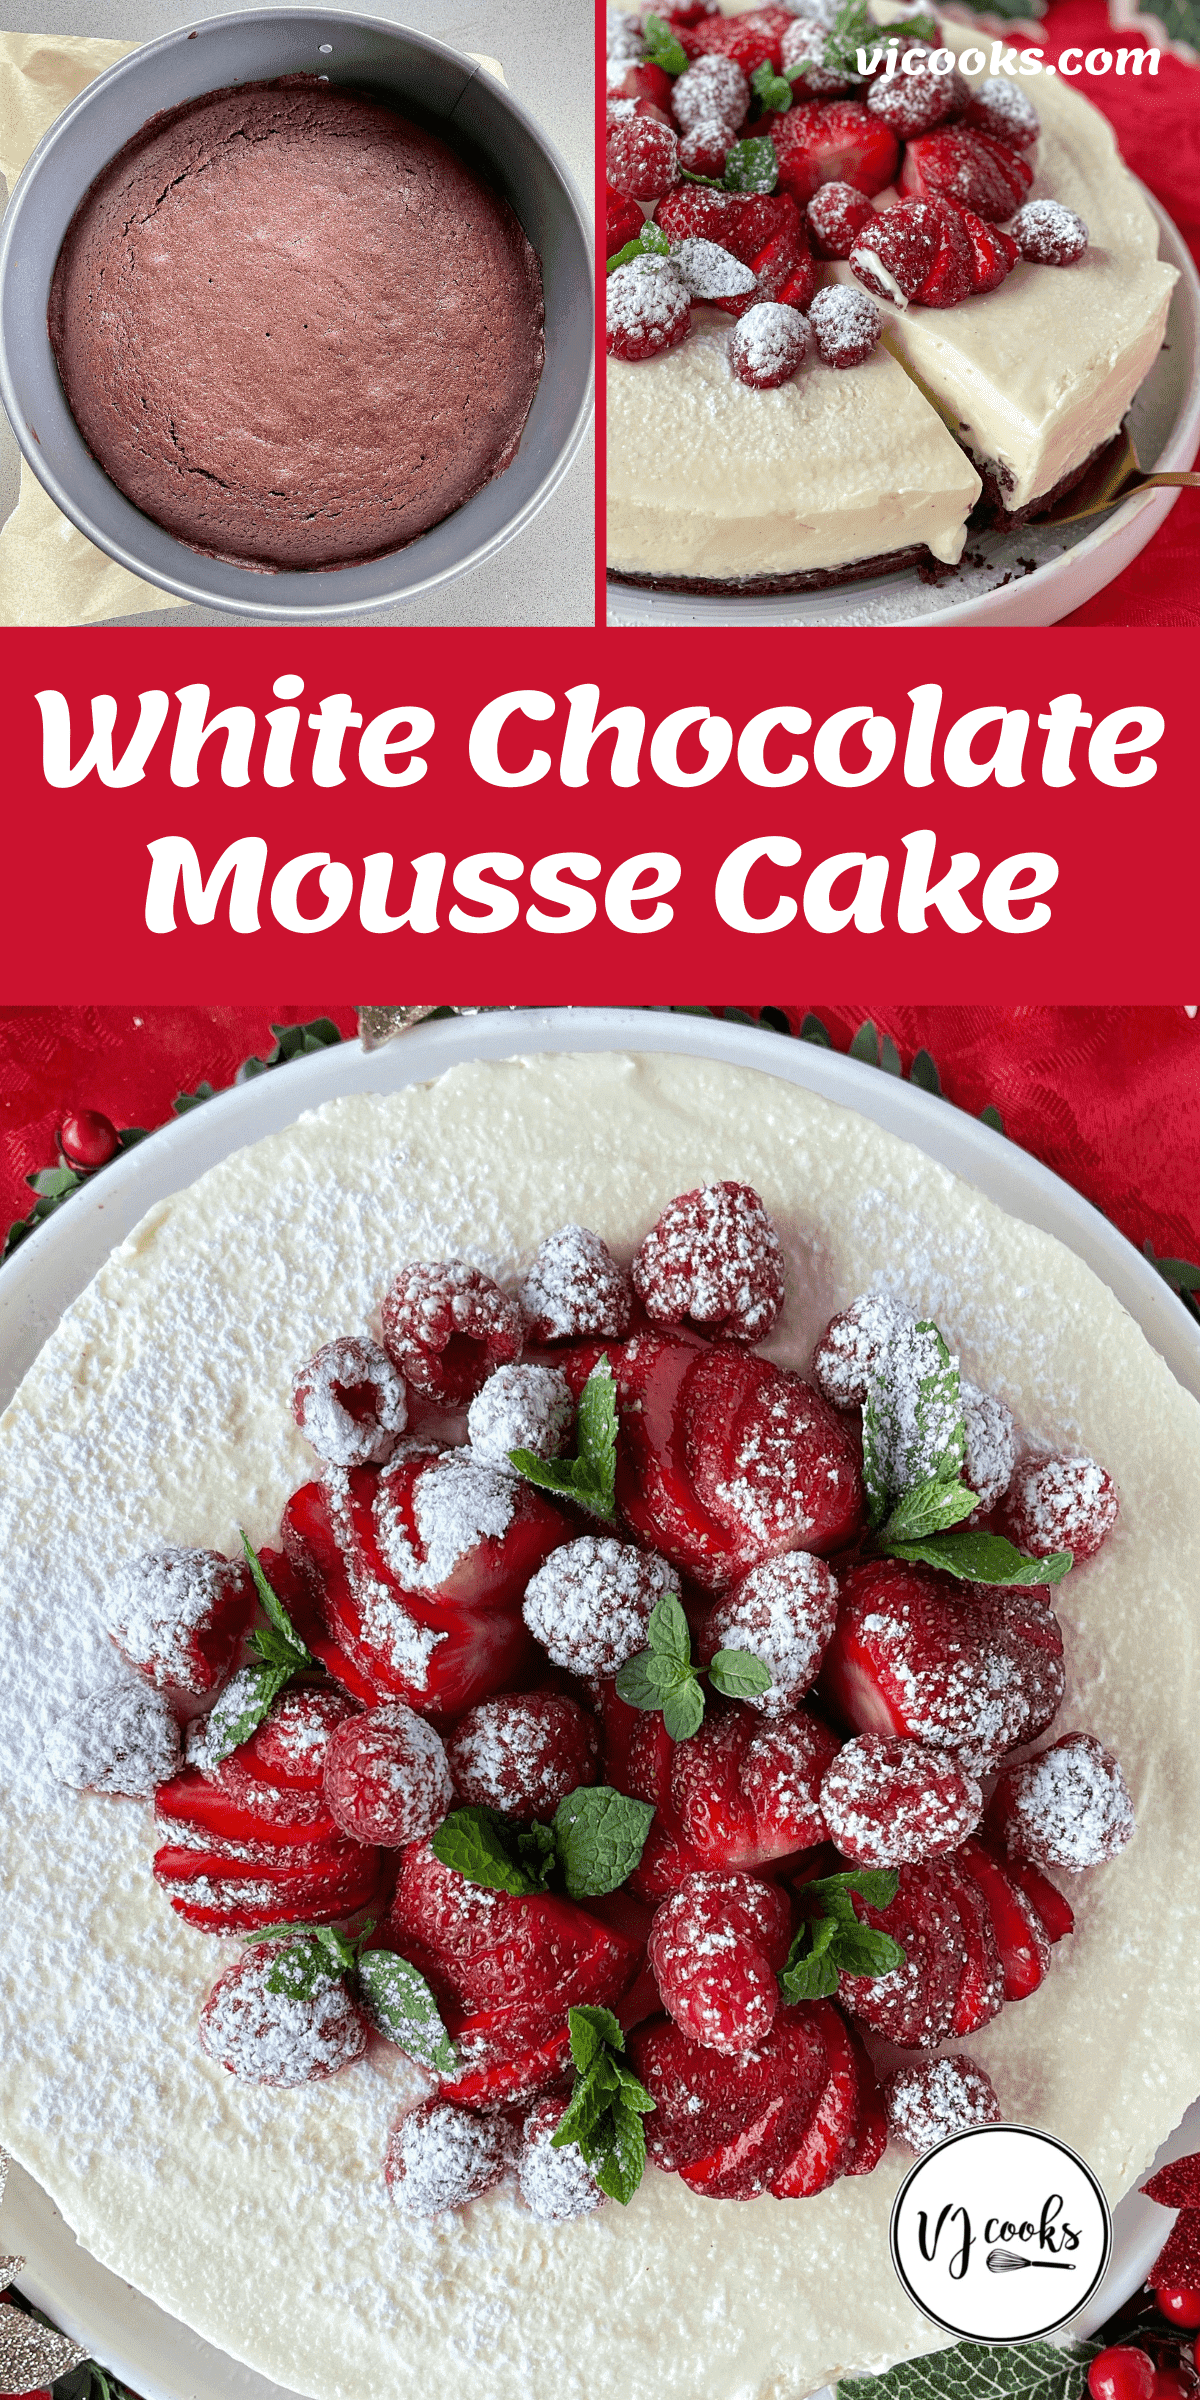 The process of making white chocolate mousse cake